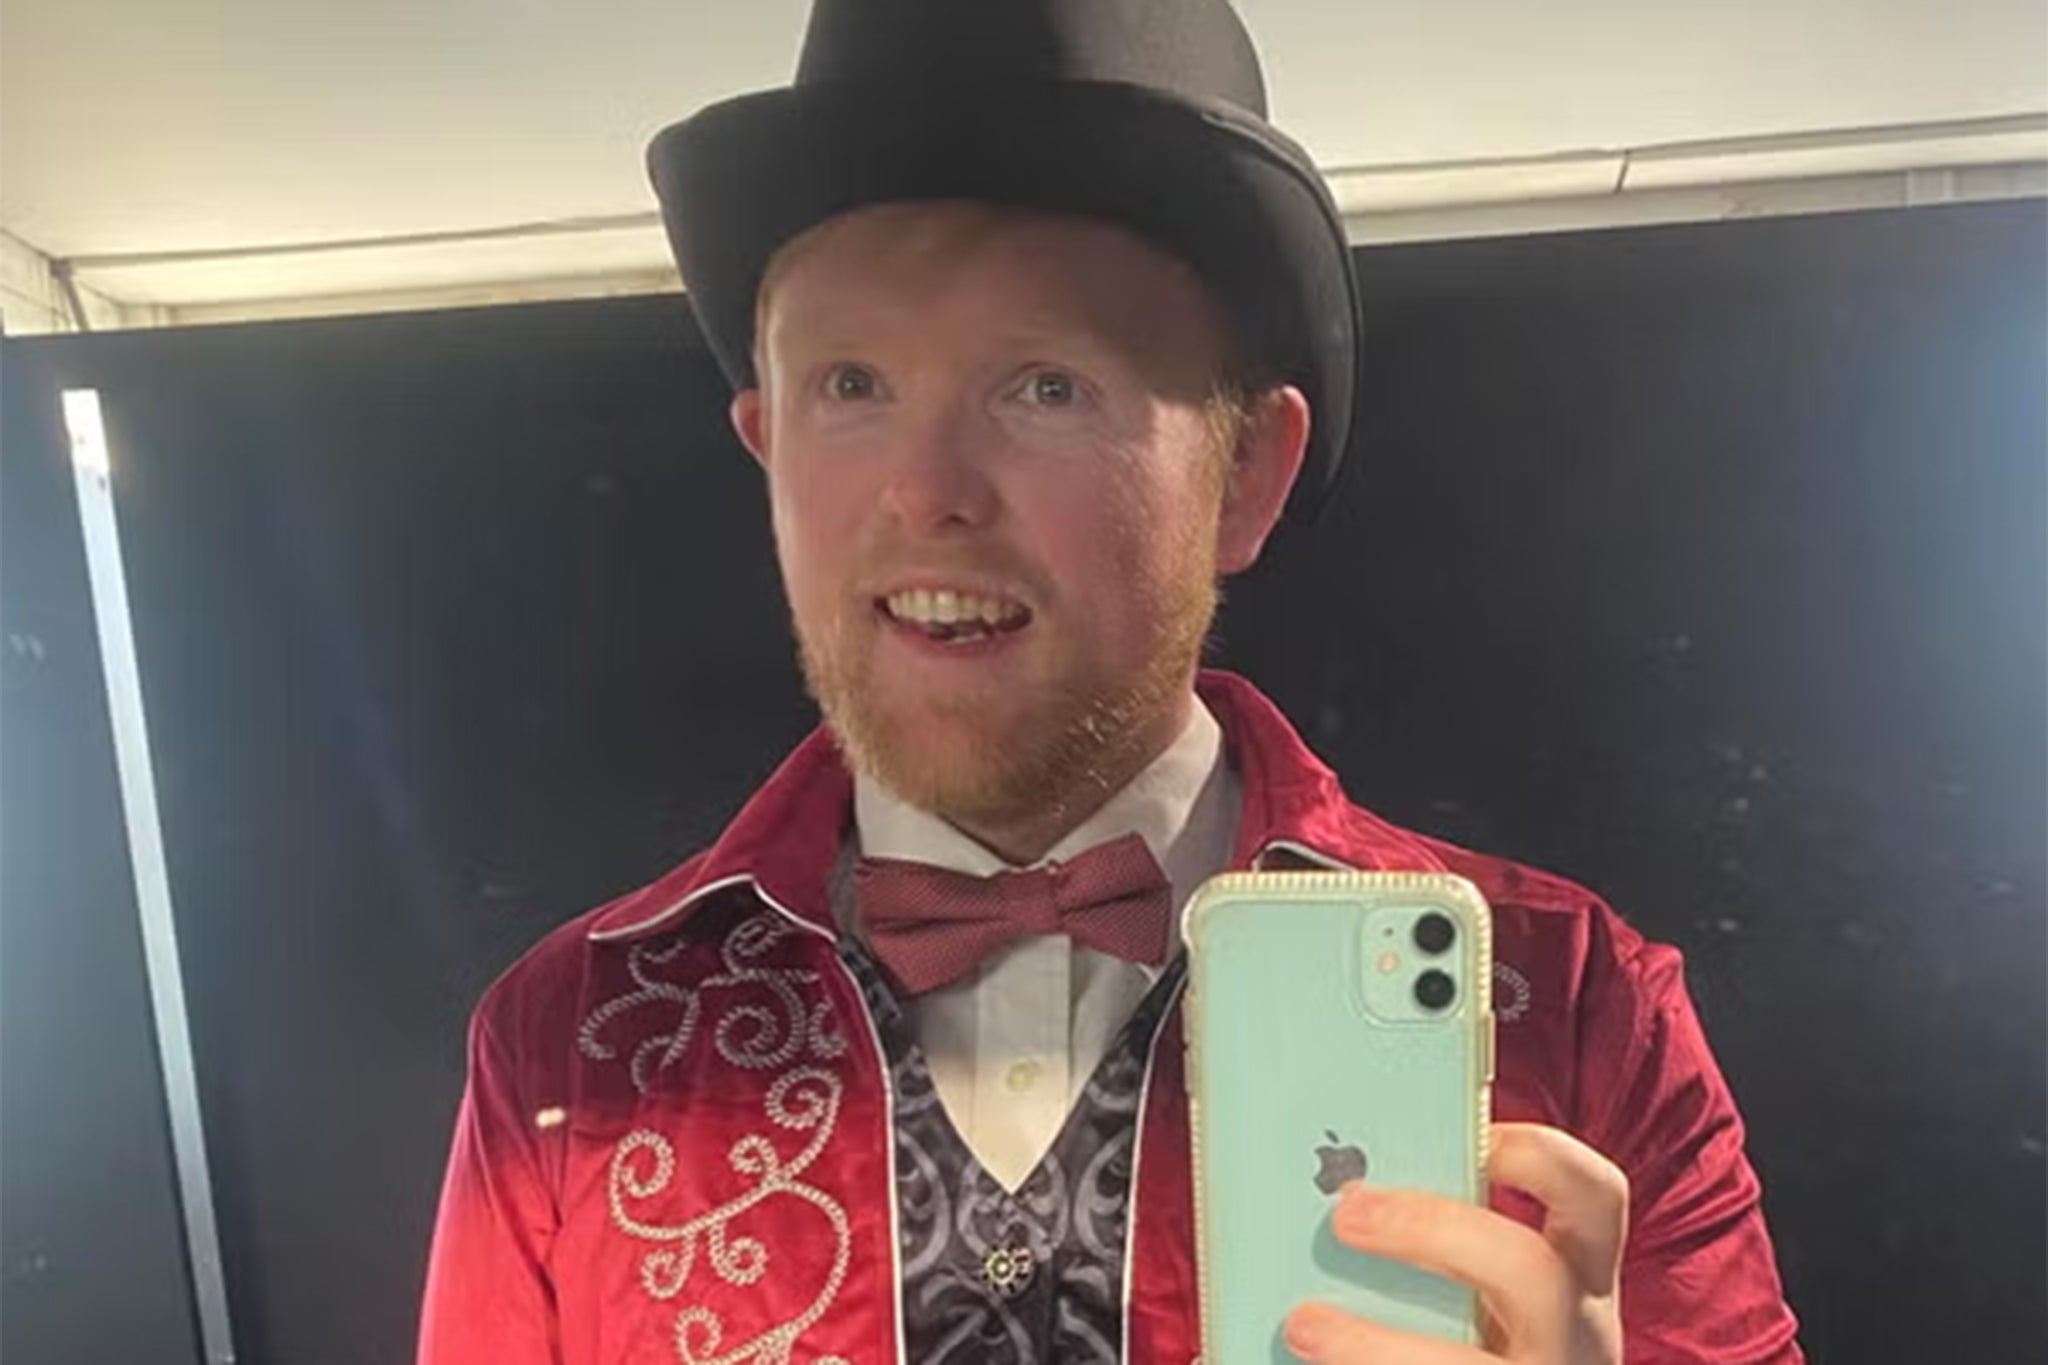 Wonka-esque impersonator Paul Connell said people were shouting as they arrived to find the event wasn’t how it was advertised